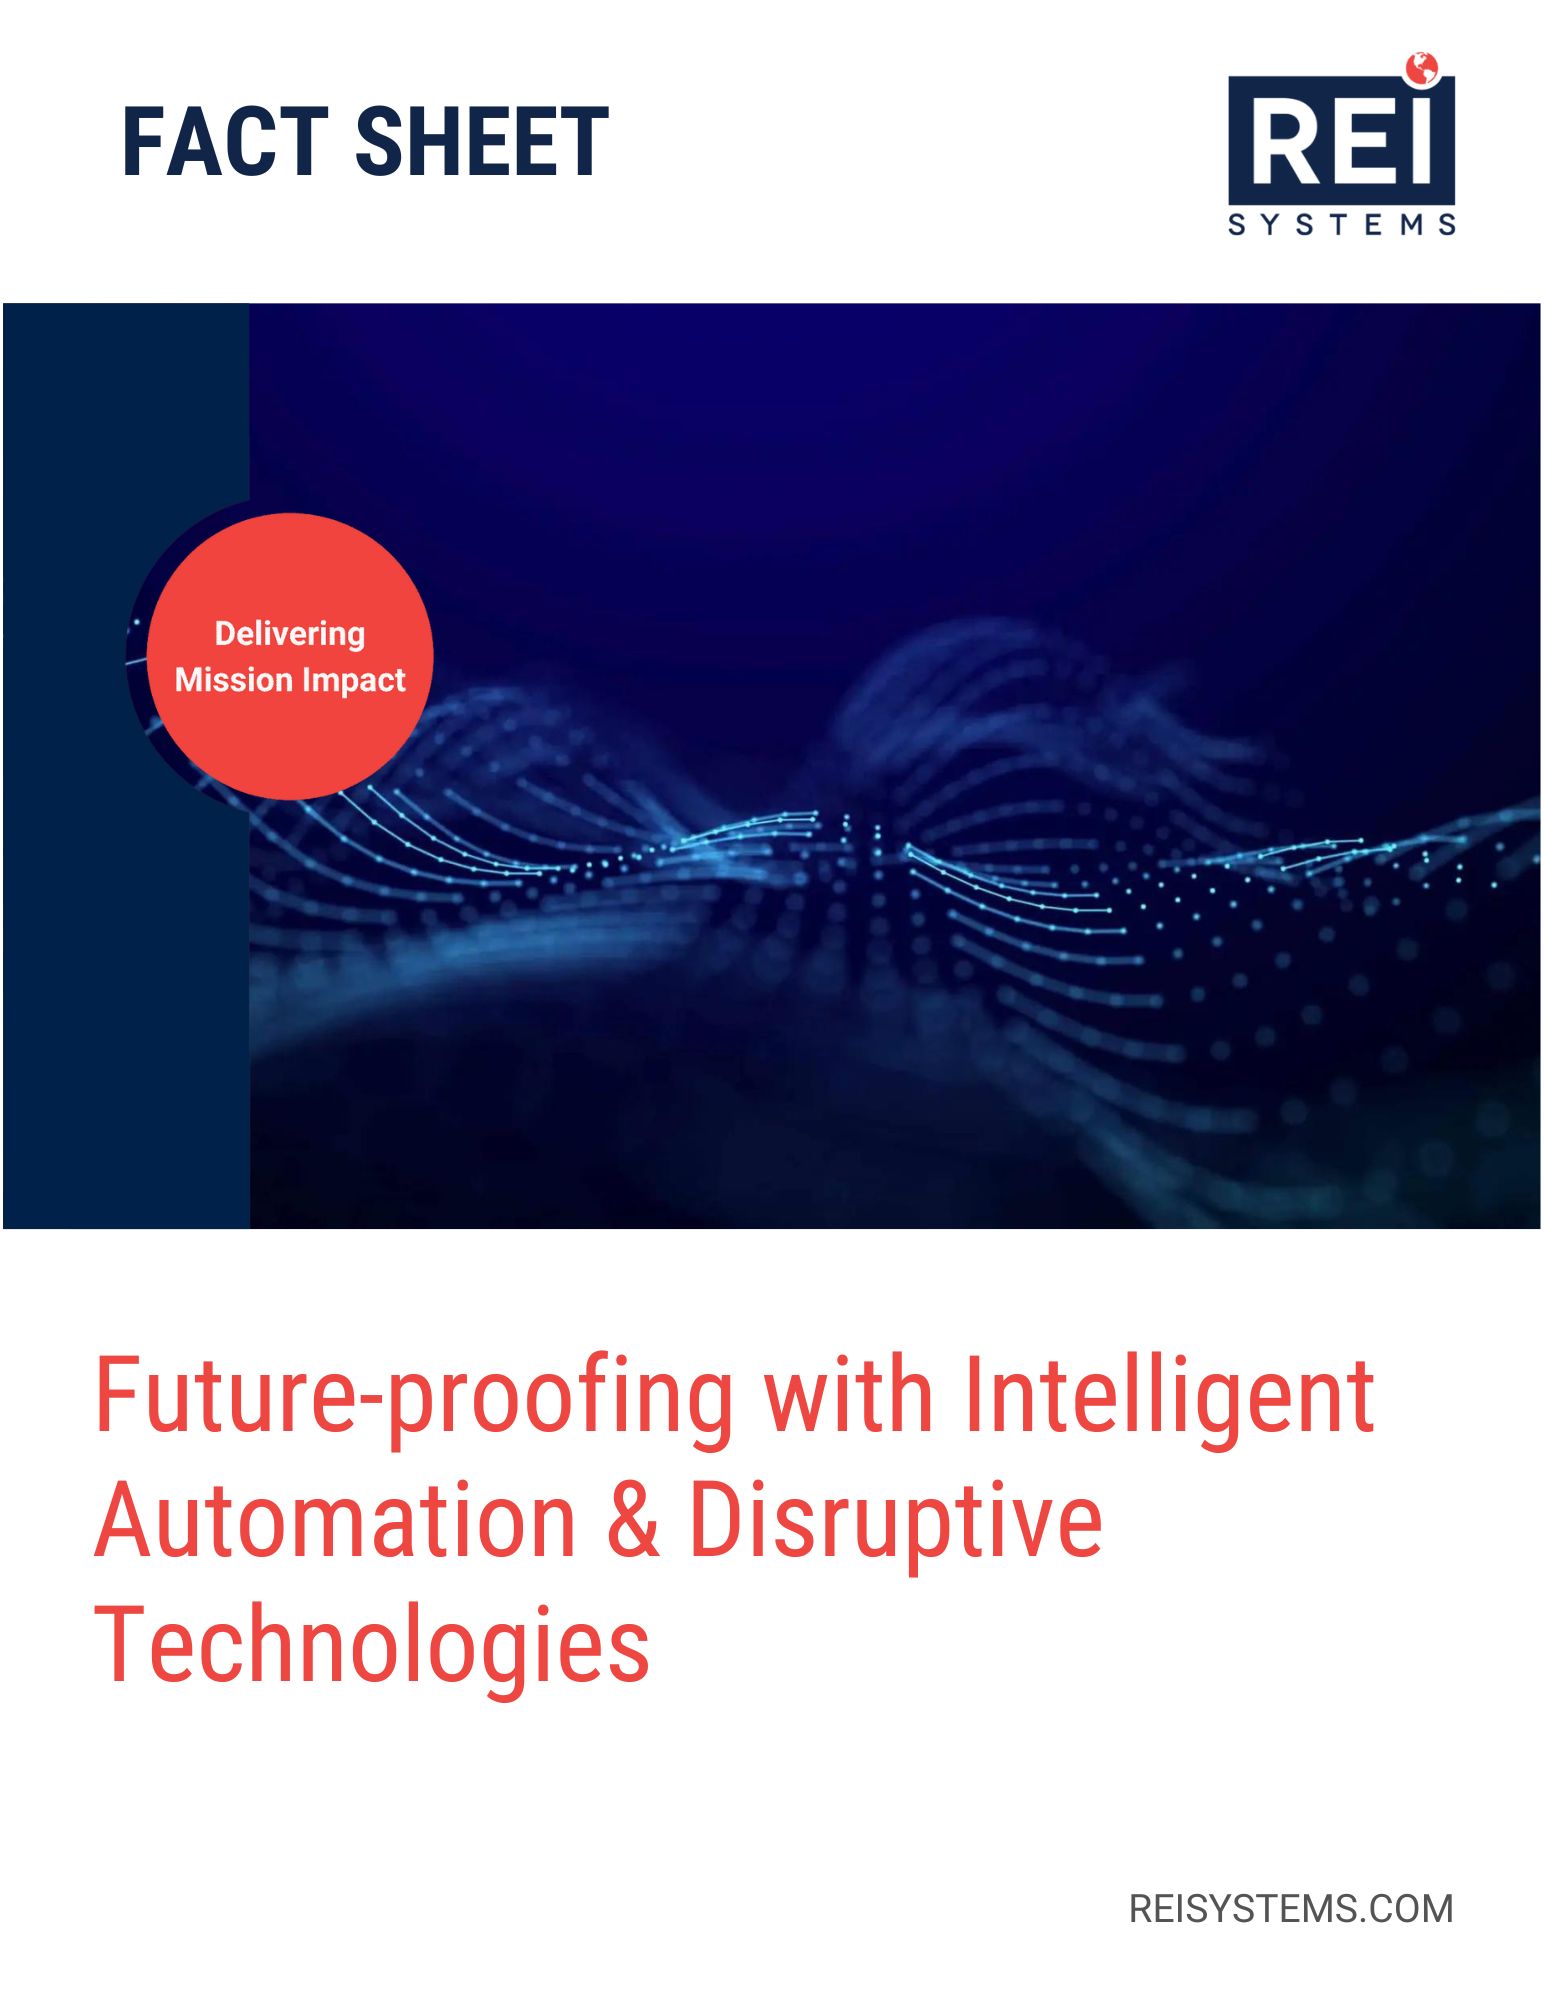 Future-proofing with Intelligent Automation & Disruptive Technologies